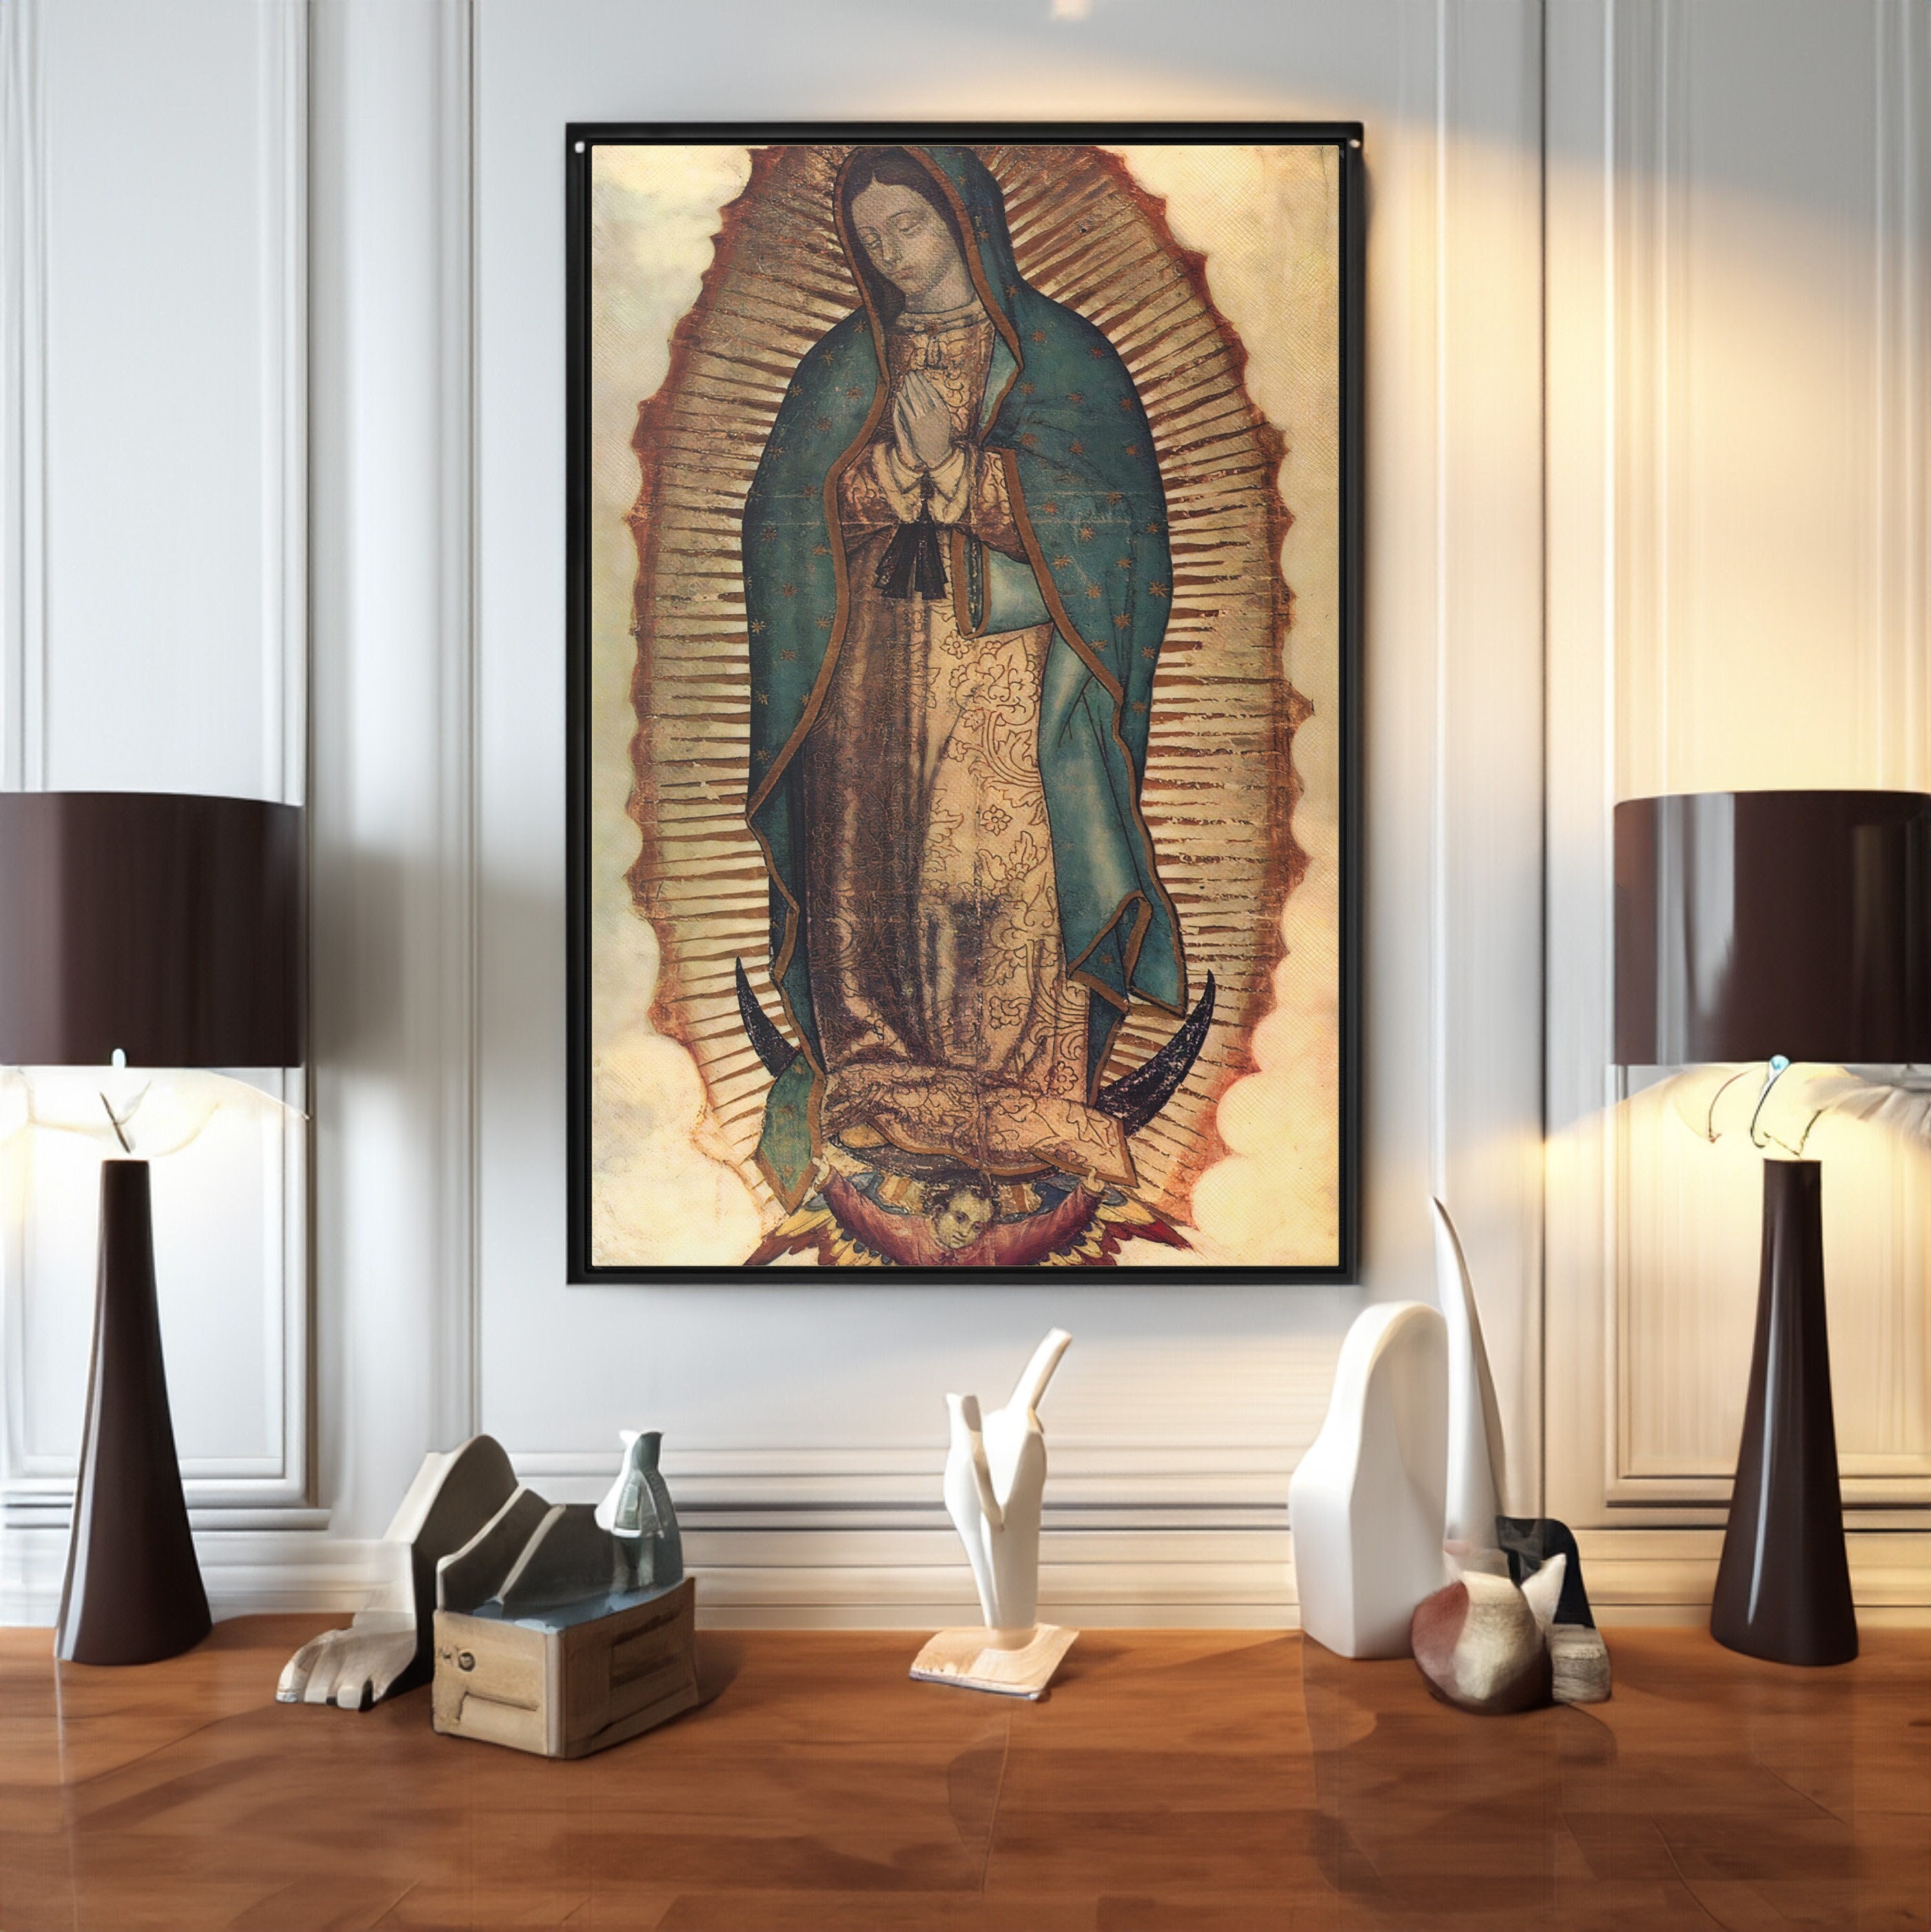 DIY 5D Diamond Painting Kits for Adults Full Drill Diamond Painting Virgin  Our Lady of Guadalupe Half Body Portrait Religious for Home Wall Decor